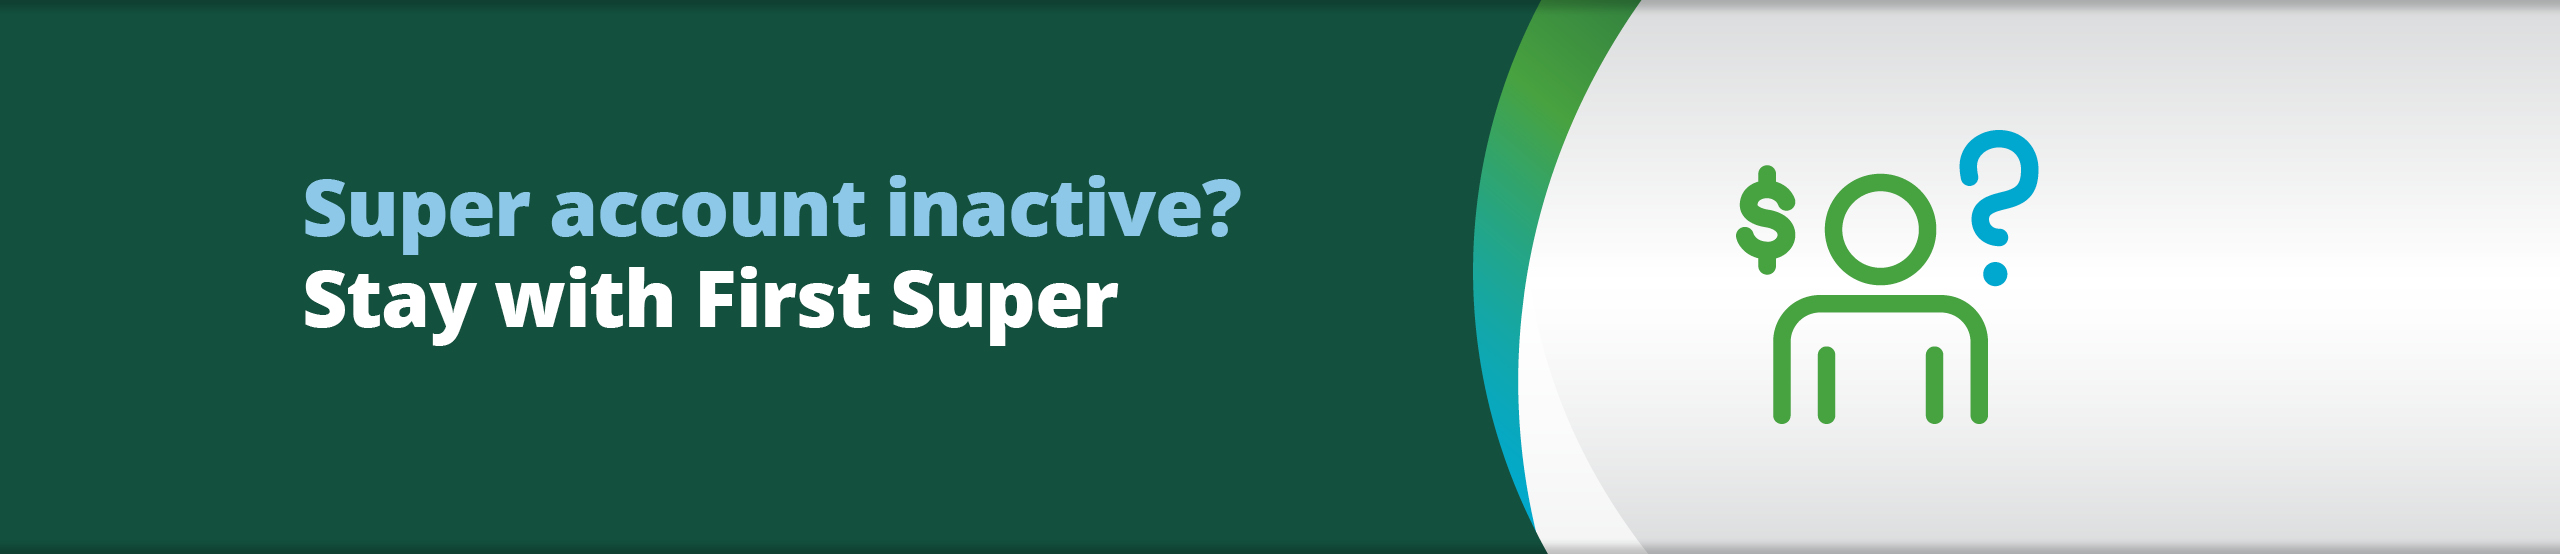 Do you have an inactive super account? Keep it with First Super.